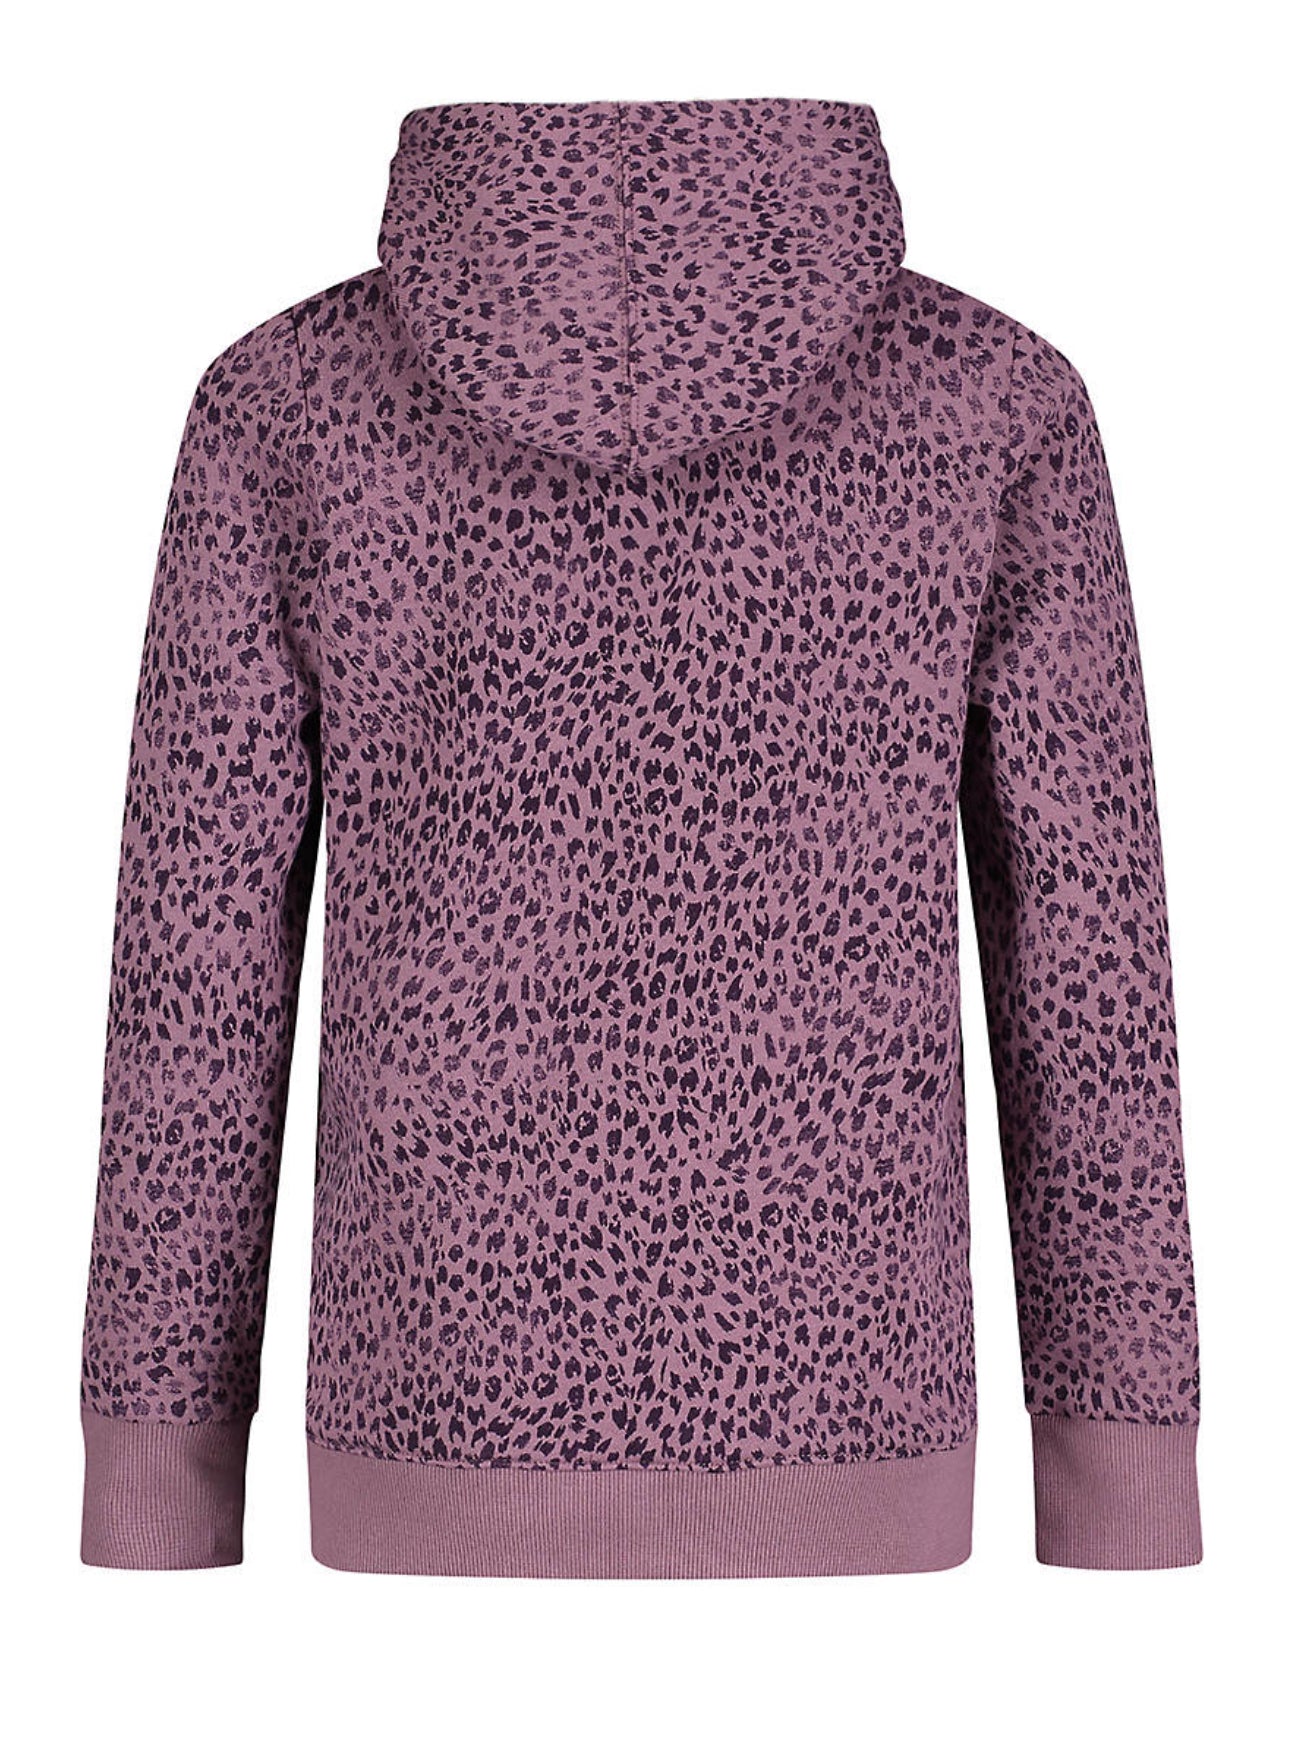 Under Armour Leopard Sherpa Lined Hoodie